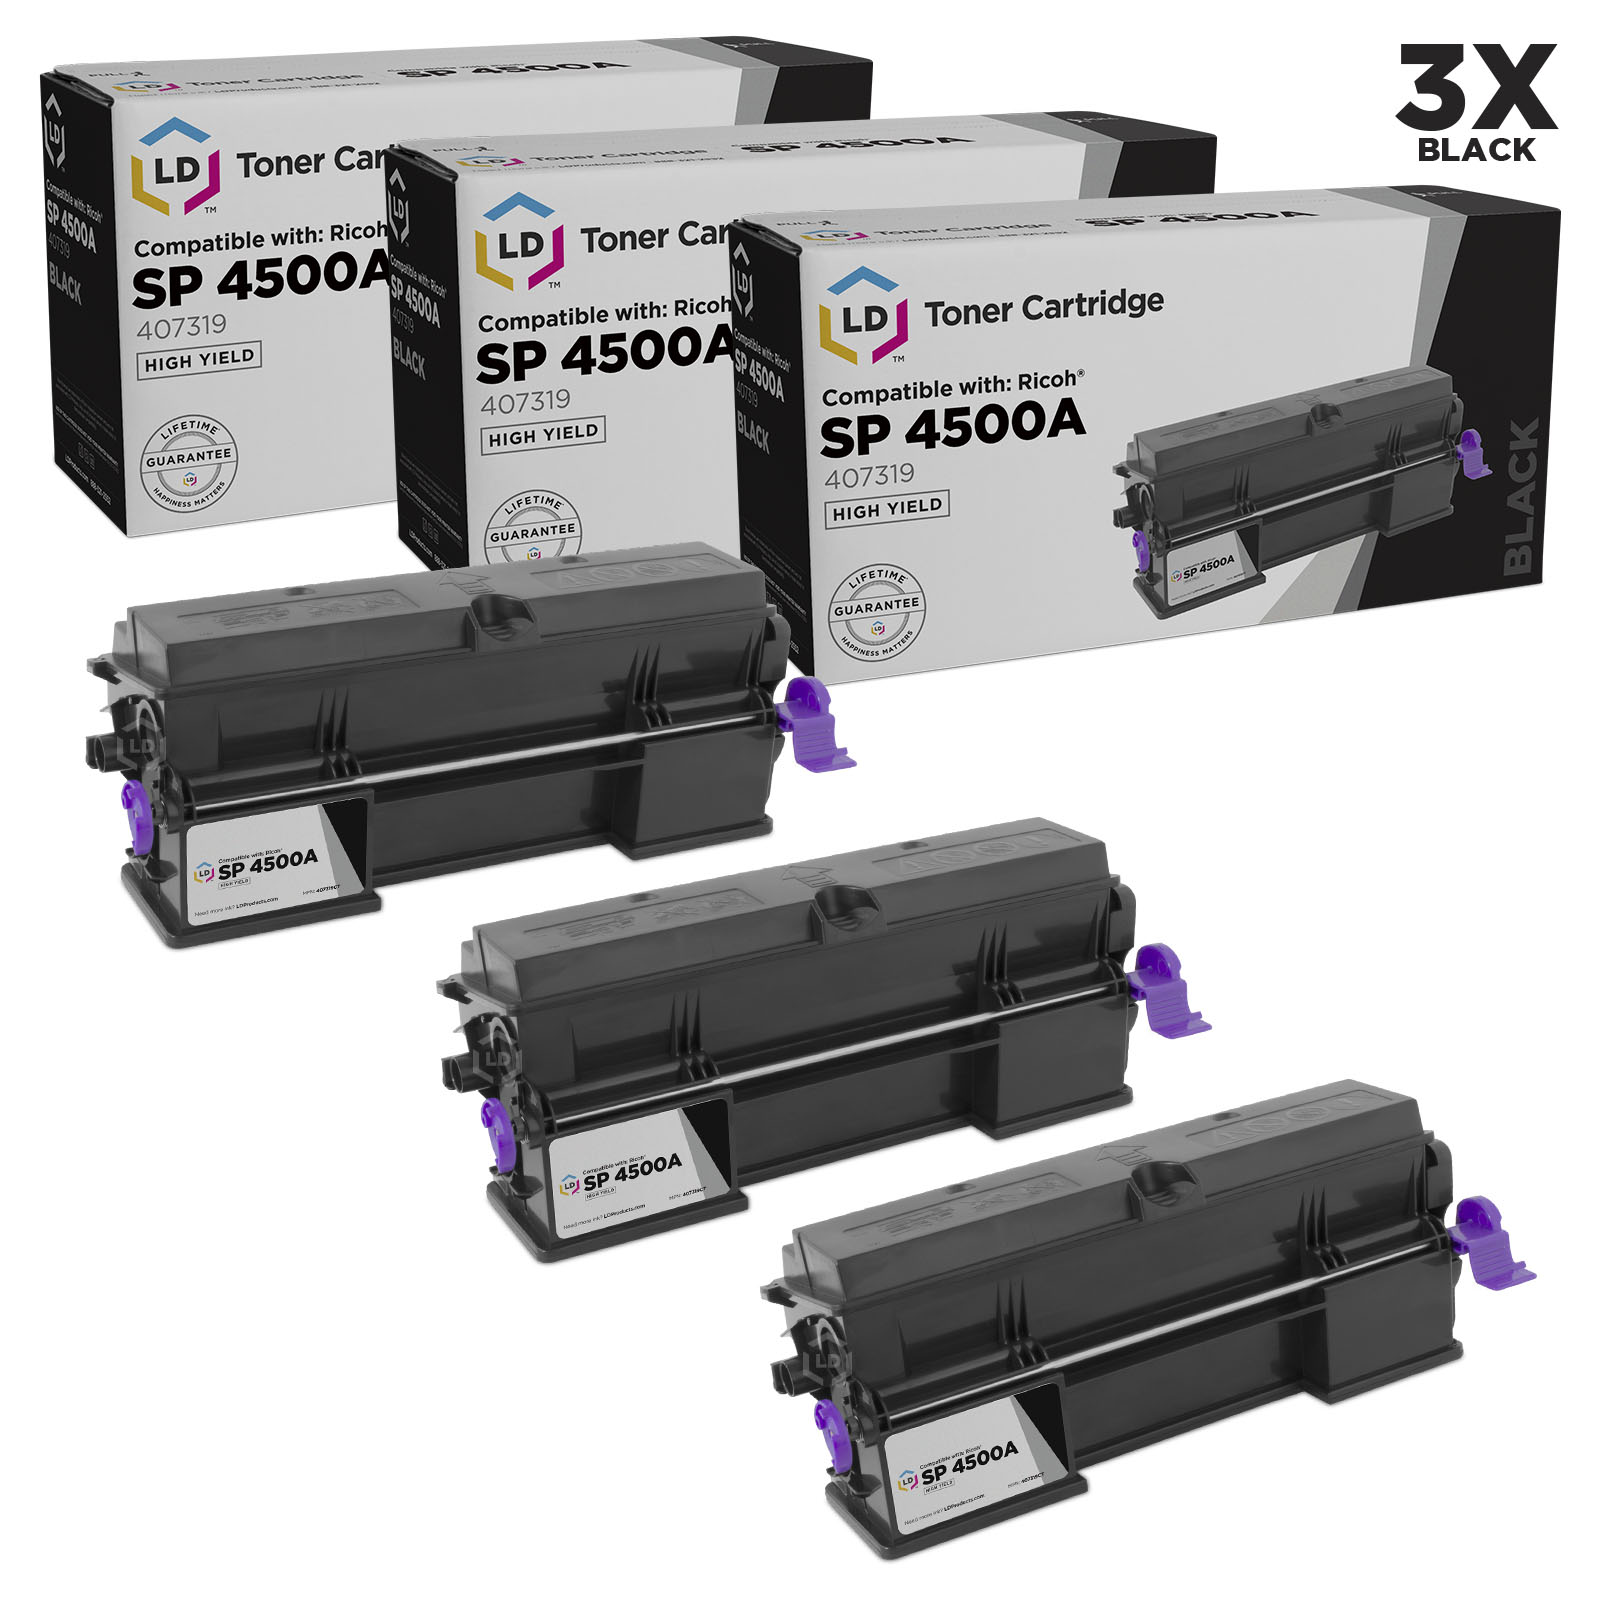 LD Compatible Ricoh 407319 / SP 4500A Set of 3 High Yield Black Toner Cartridges for use in SP 3600DN, SP 3600SF, SP 3610SF, SP 4510DN, SP 4510SF & MP 401SPF (6,000 Page Yield) - image 1 of 2